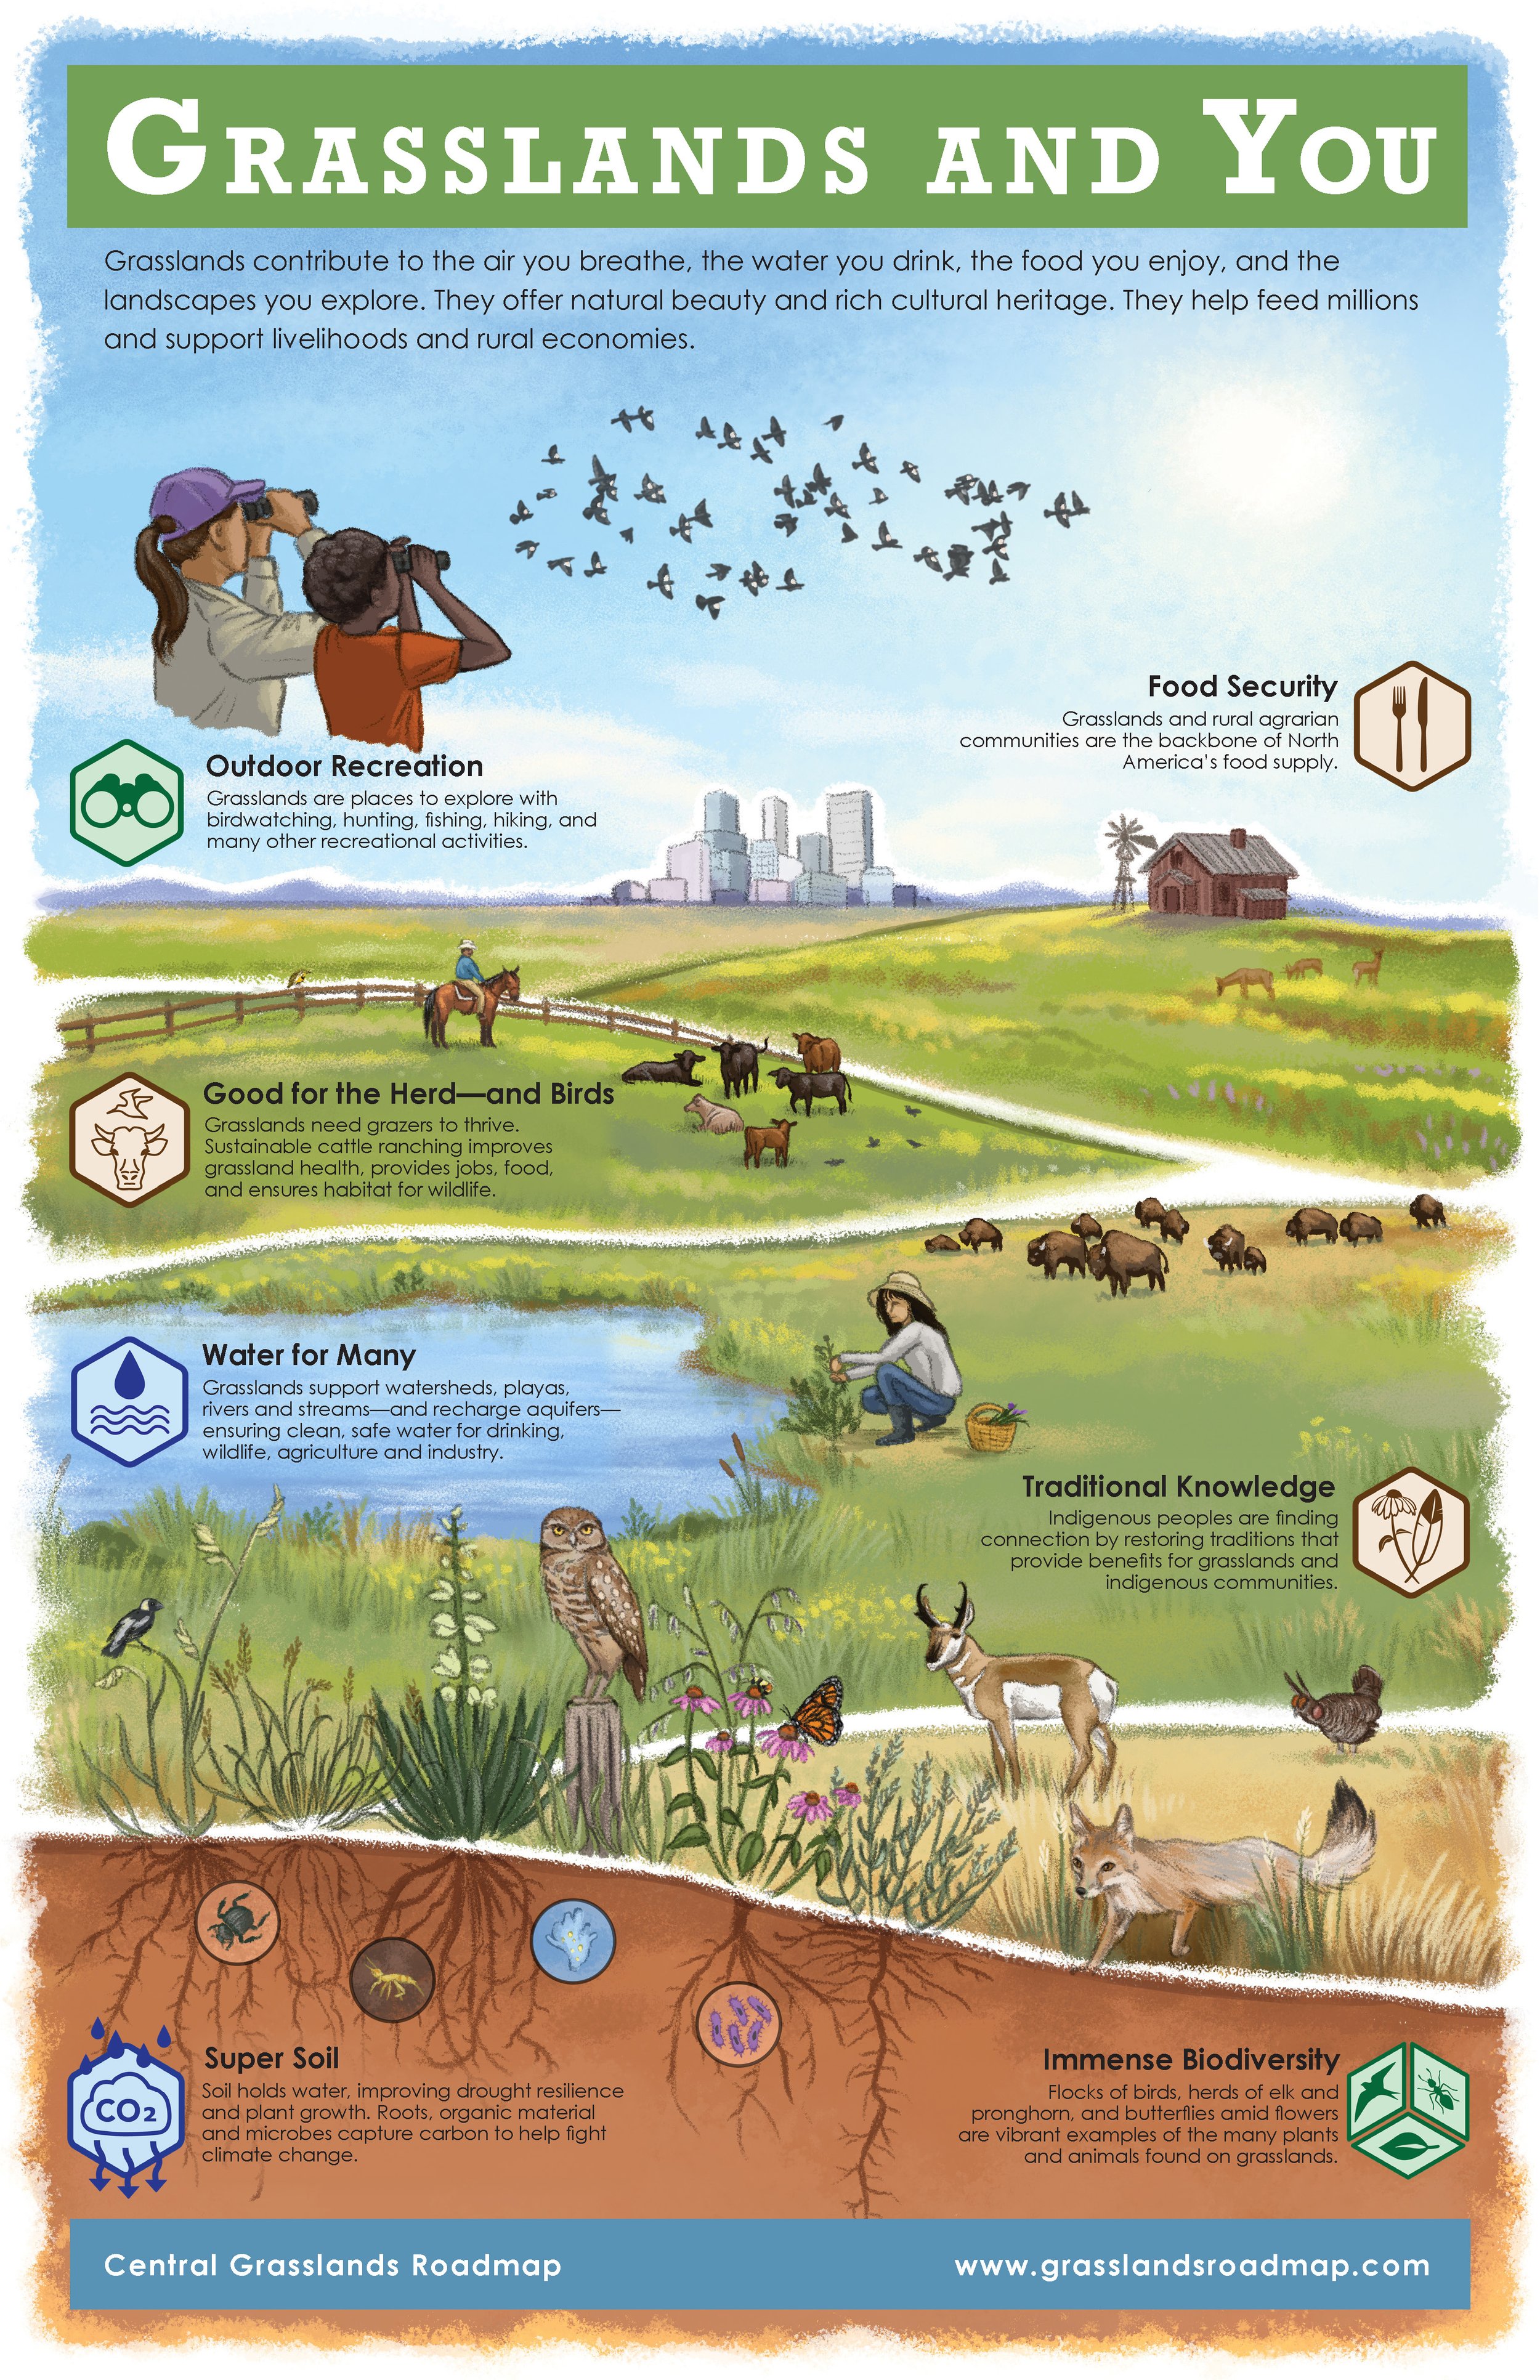 "Grasslands and You" Campaign Infographic